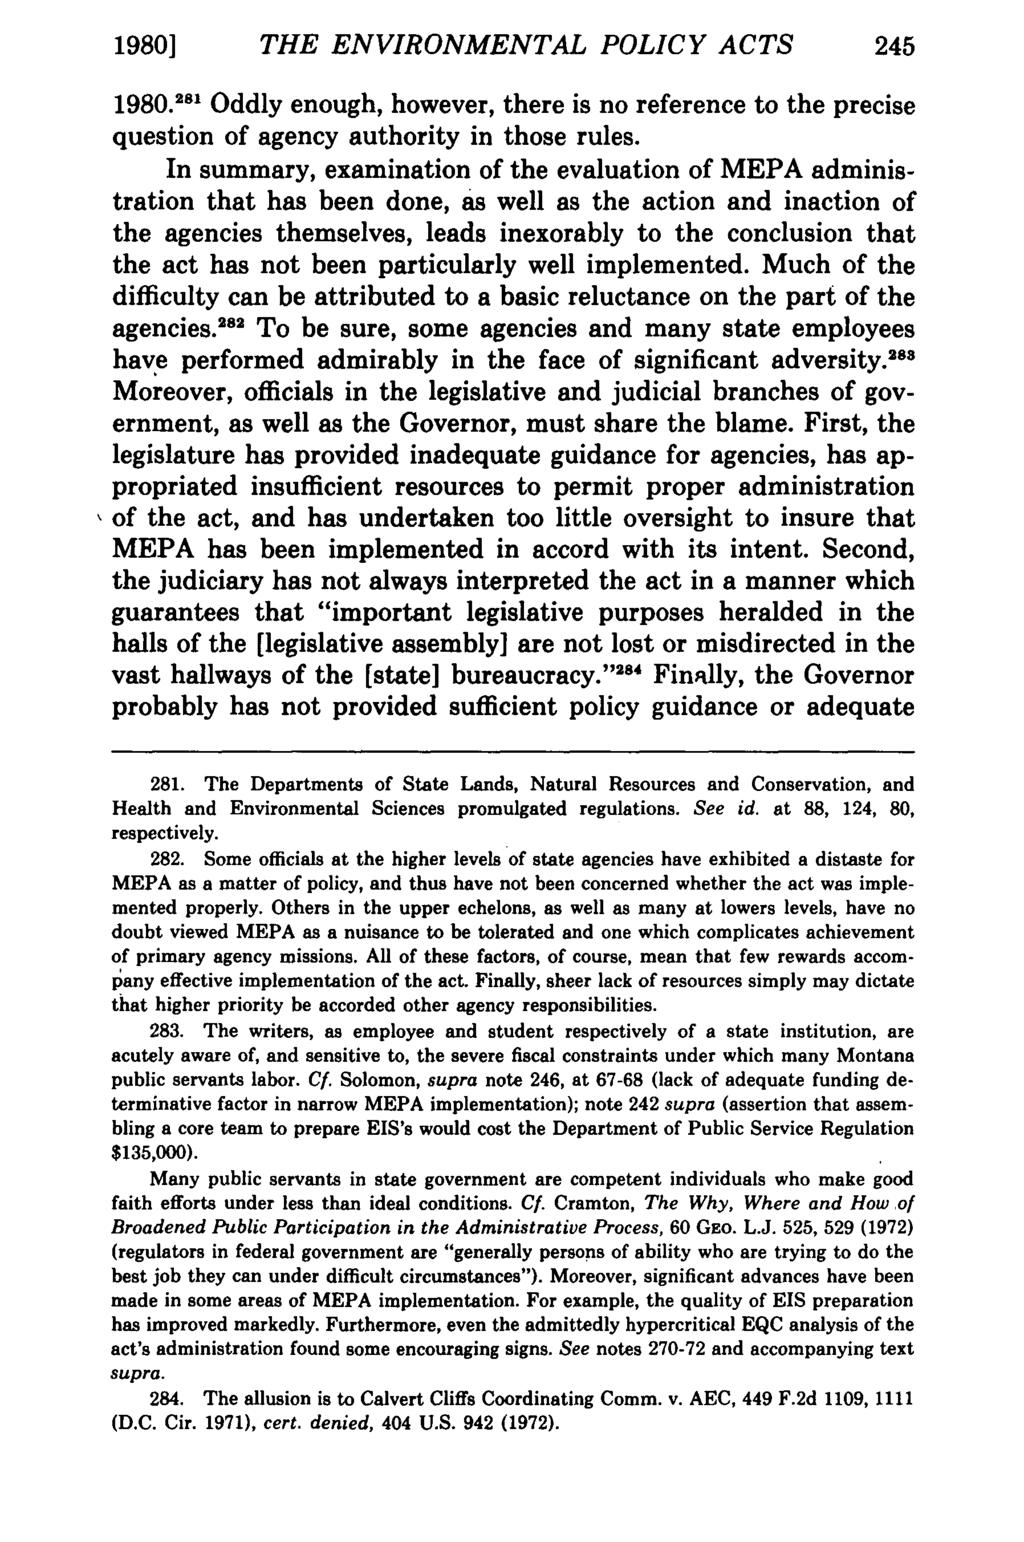 1980] THE ENVIRONMENT AL POLICY ACTS 245 1980. 281 Oddly enough, however, there is no reference to the precise question of agency authority in those rules.